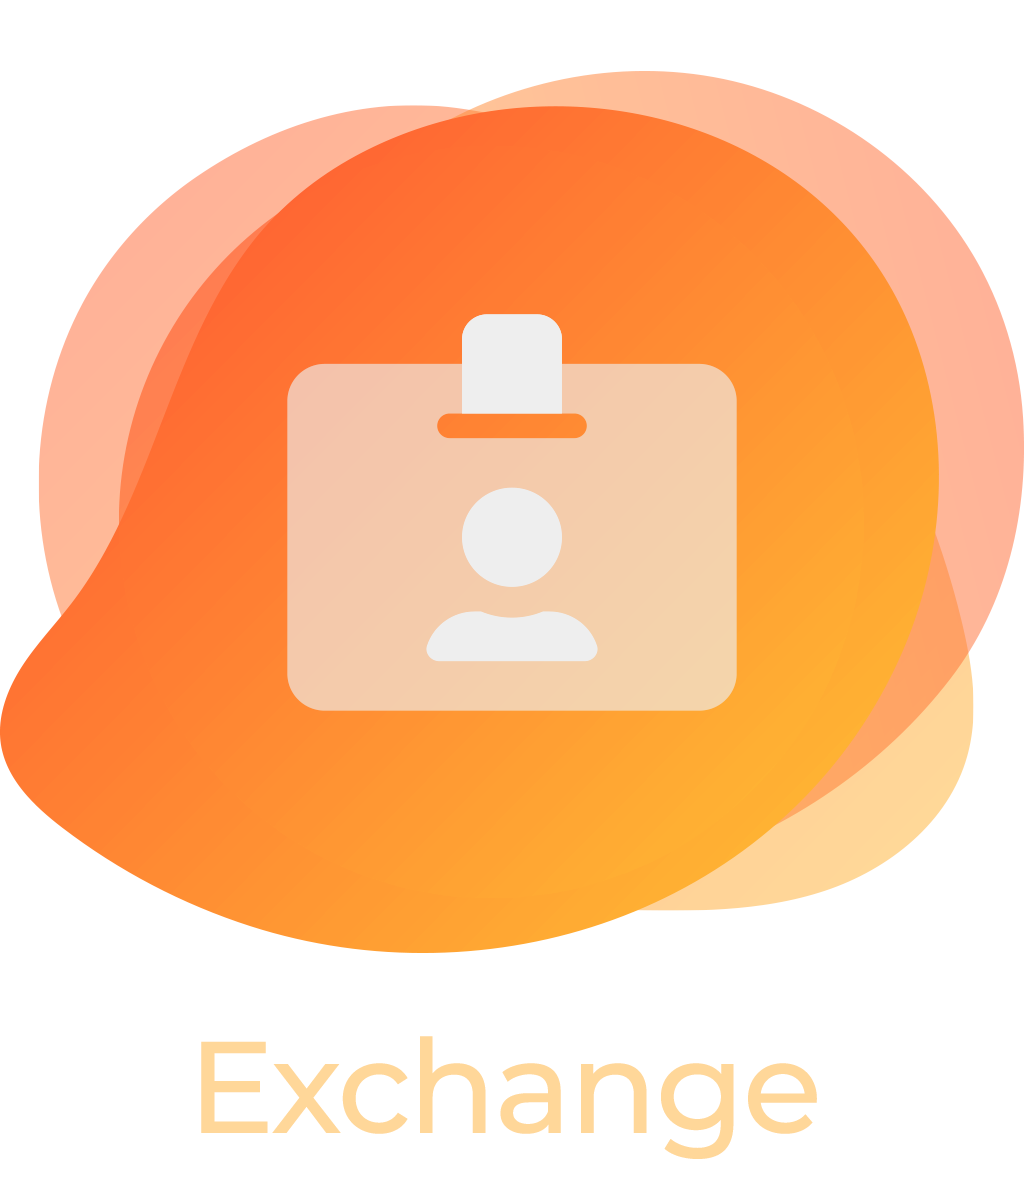 Frontdesk's namecard exchange feature allows attendees to easily exchange their contact information through the Frontdesk app.